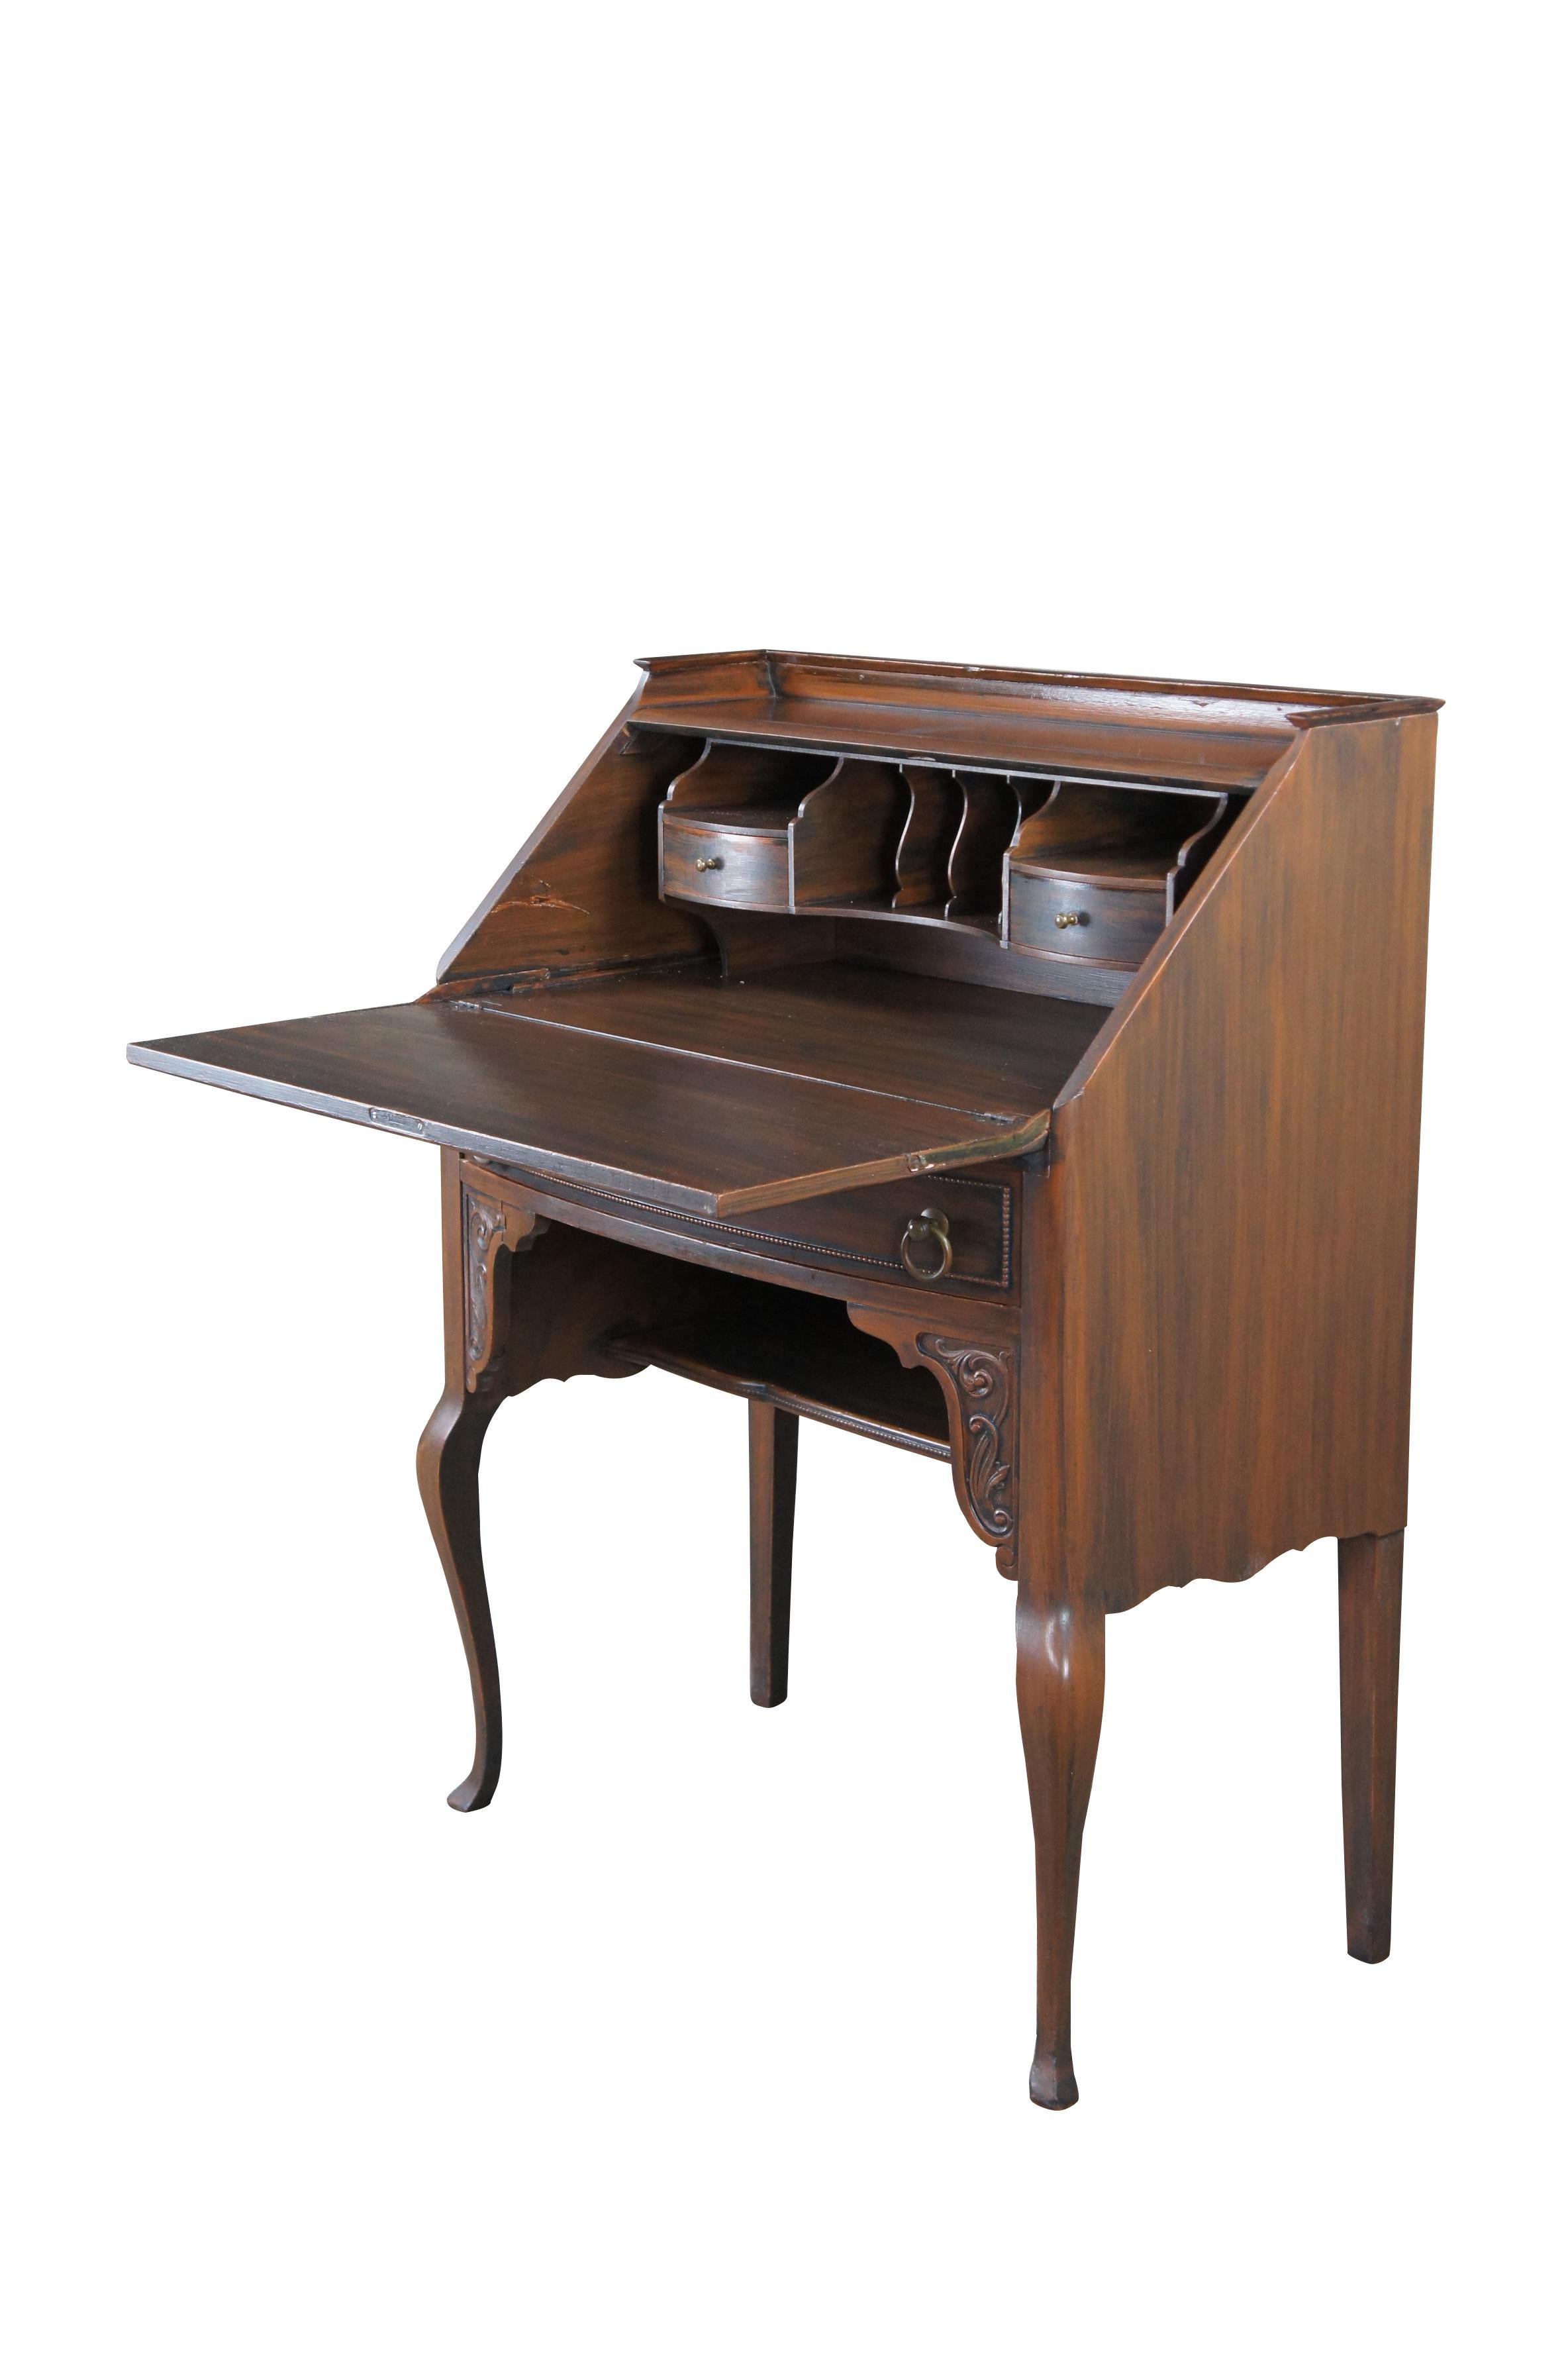 Antique Victorian Painted Grain Dragon Griffon Secretary Library Writing Desk In Good Condition For Sale In Dayton, OH